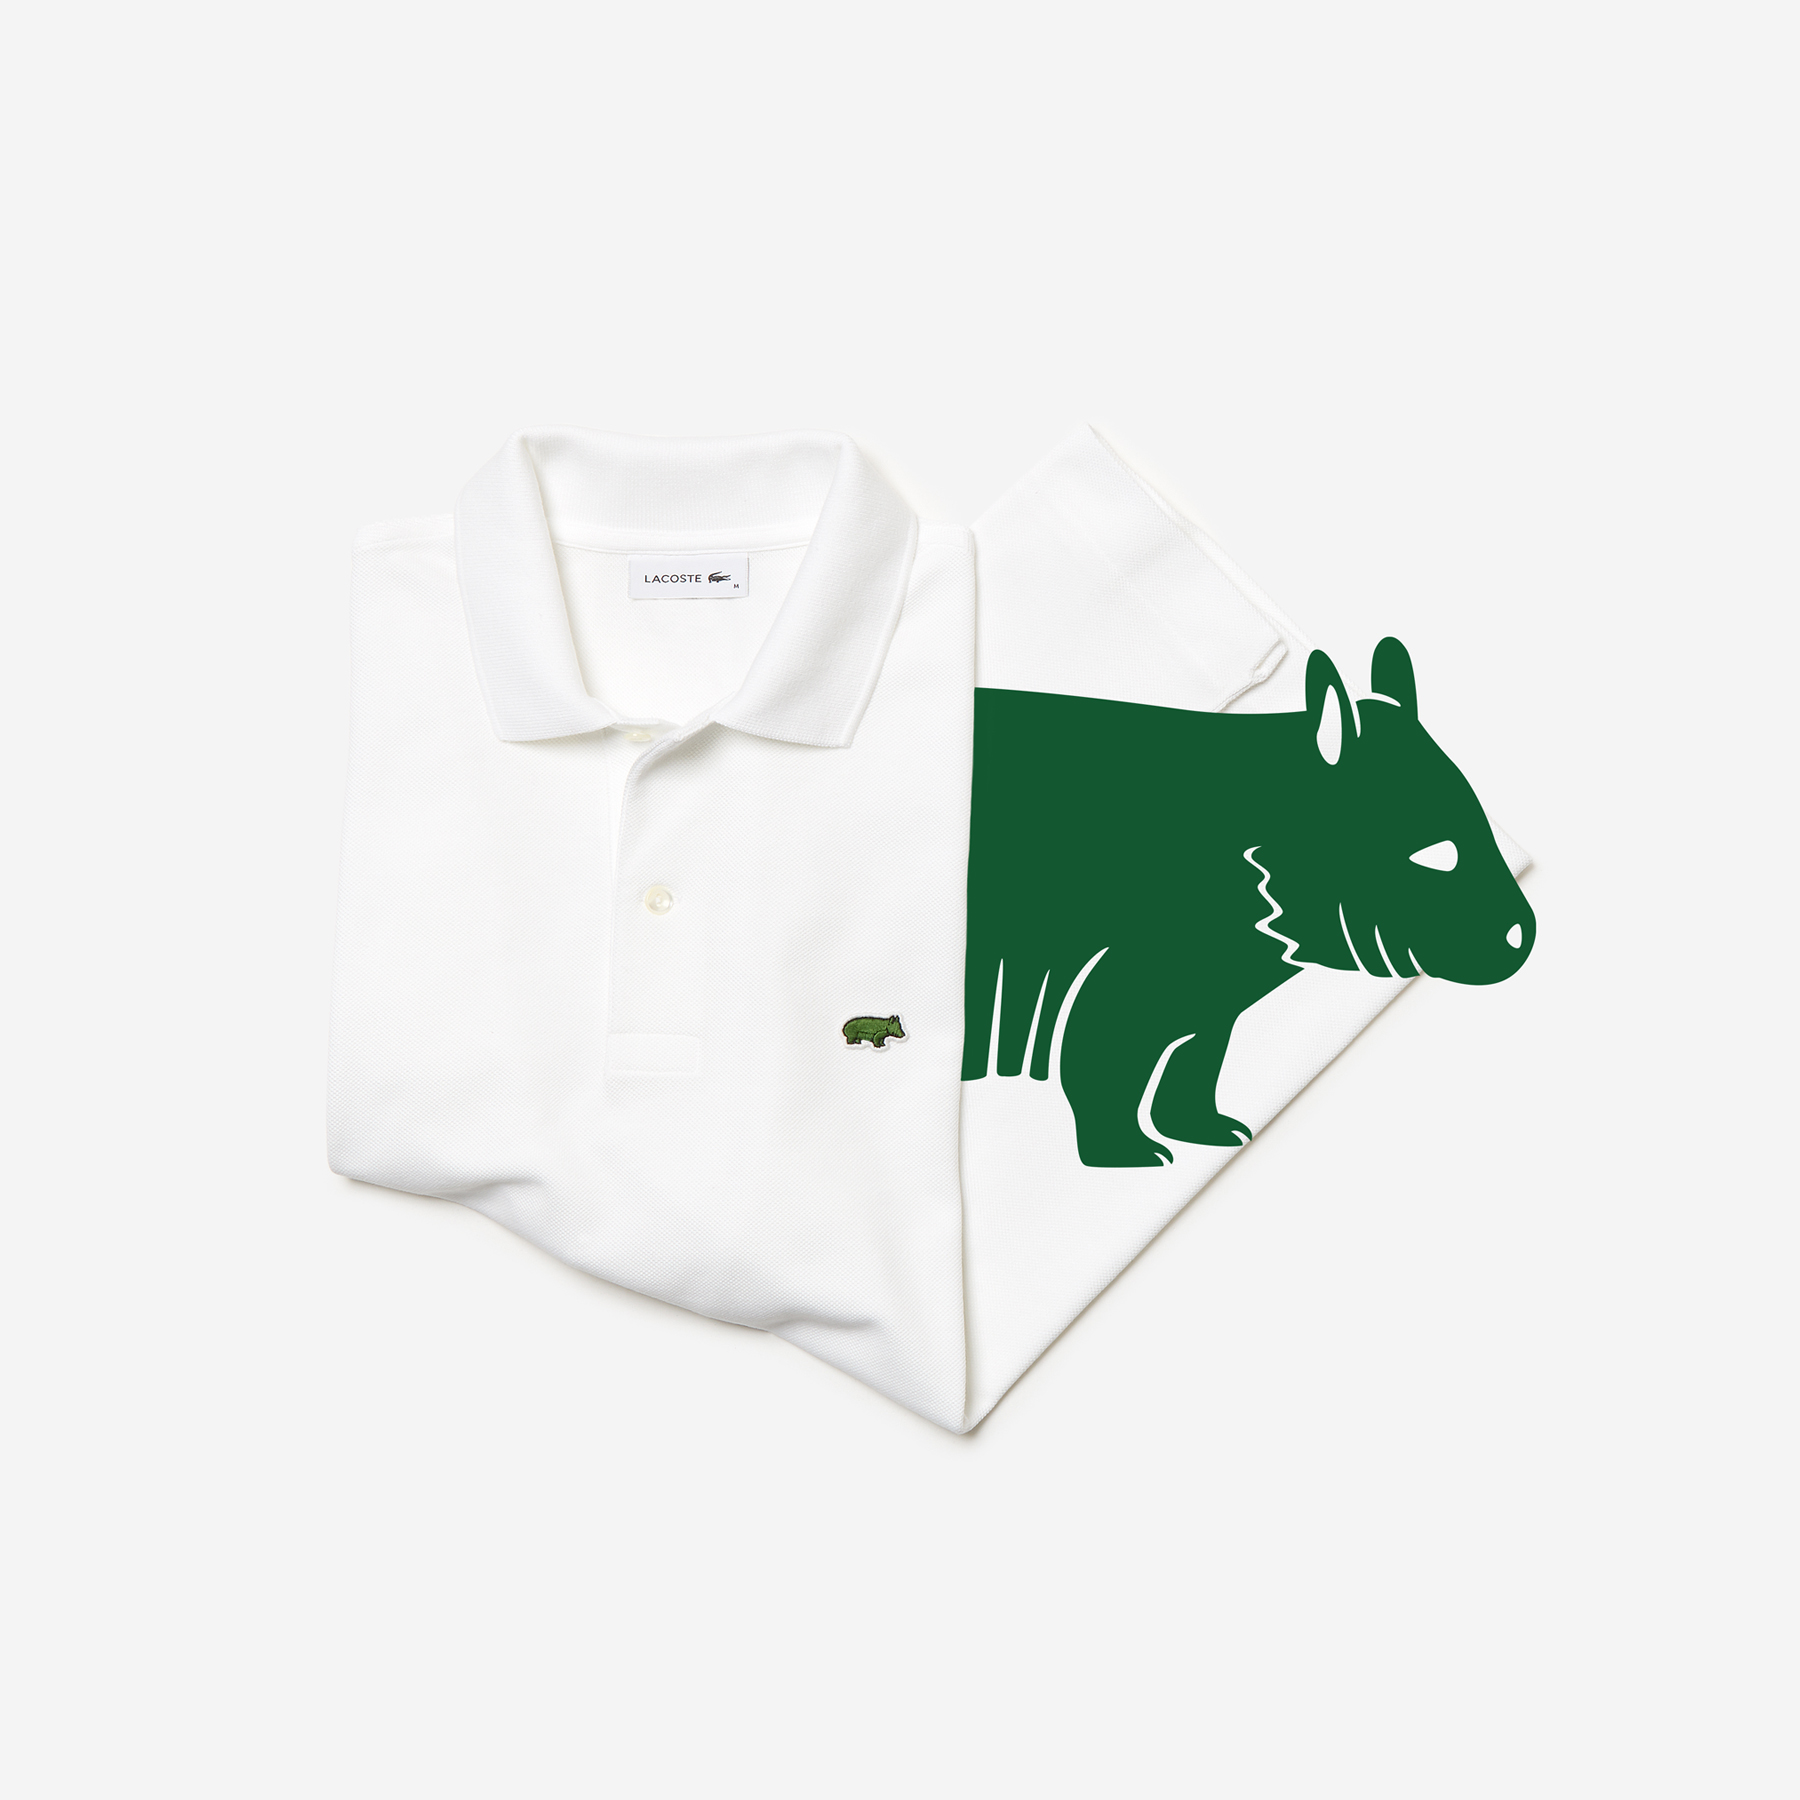 tuberkulose etc Vælge Lacoste x Save Our Species (IUCN) — SSI Life